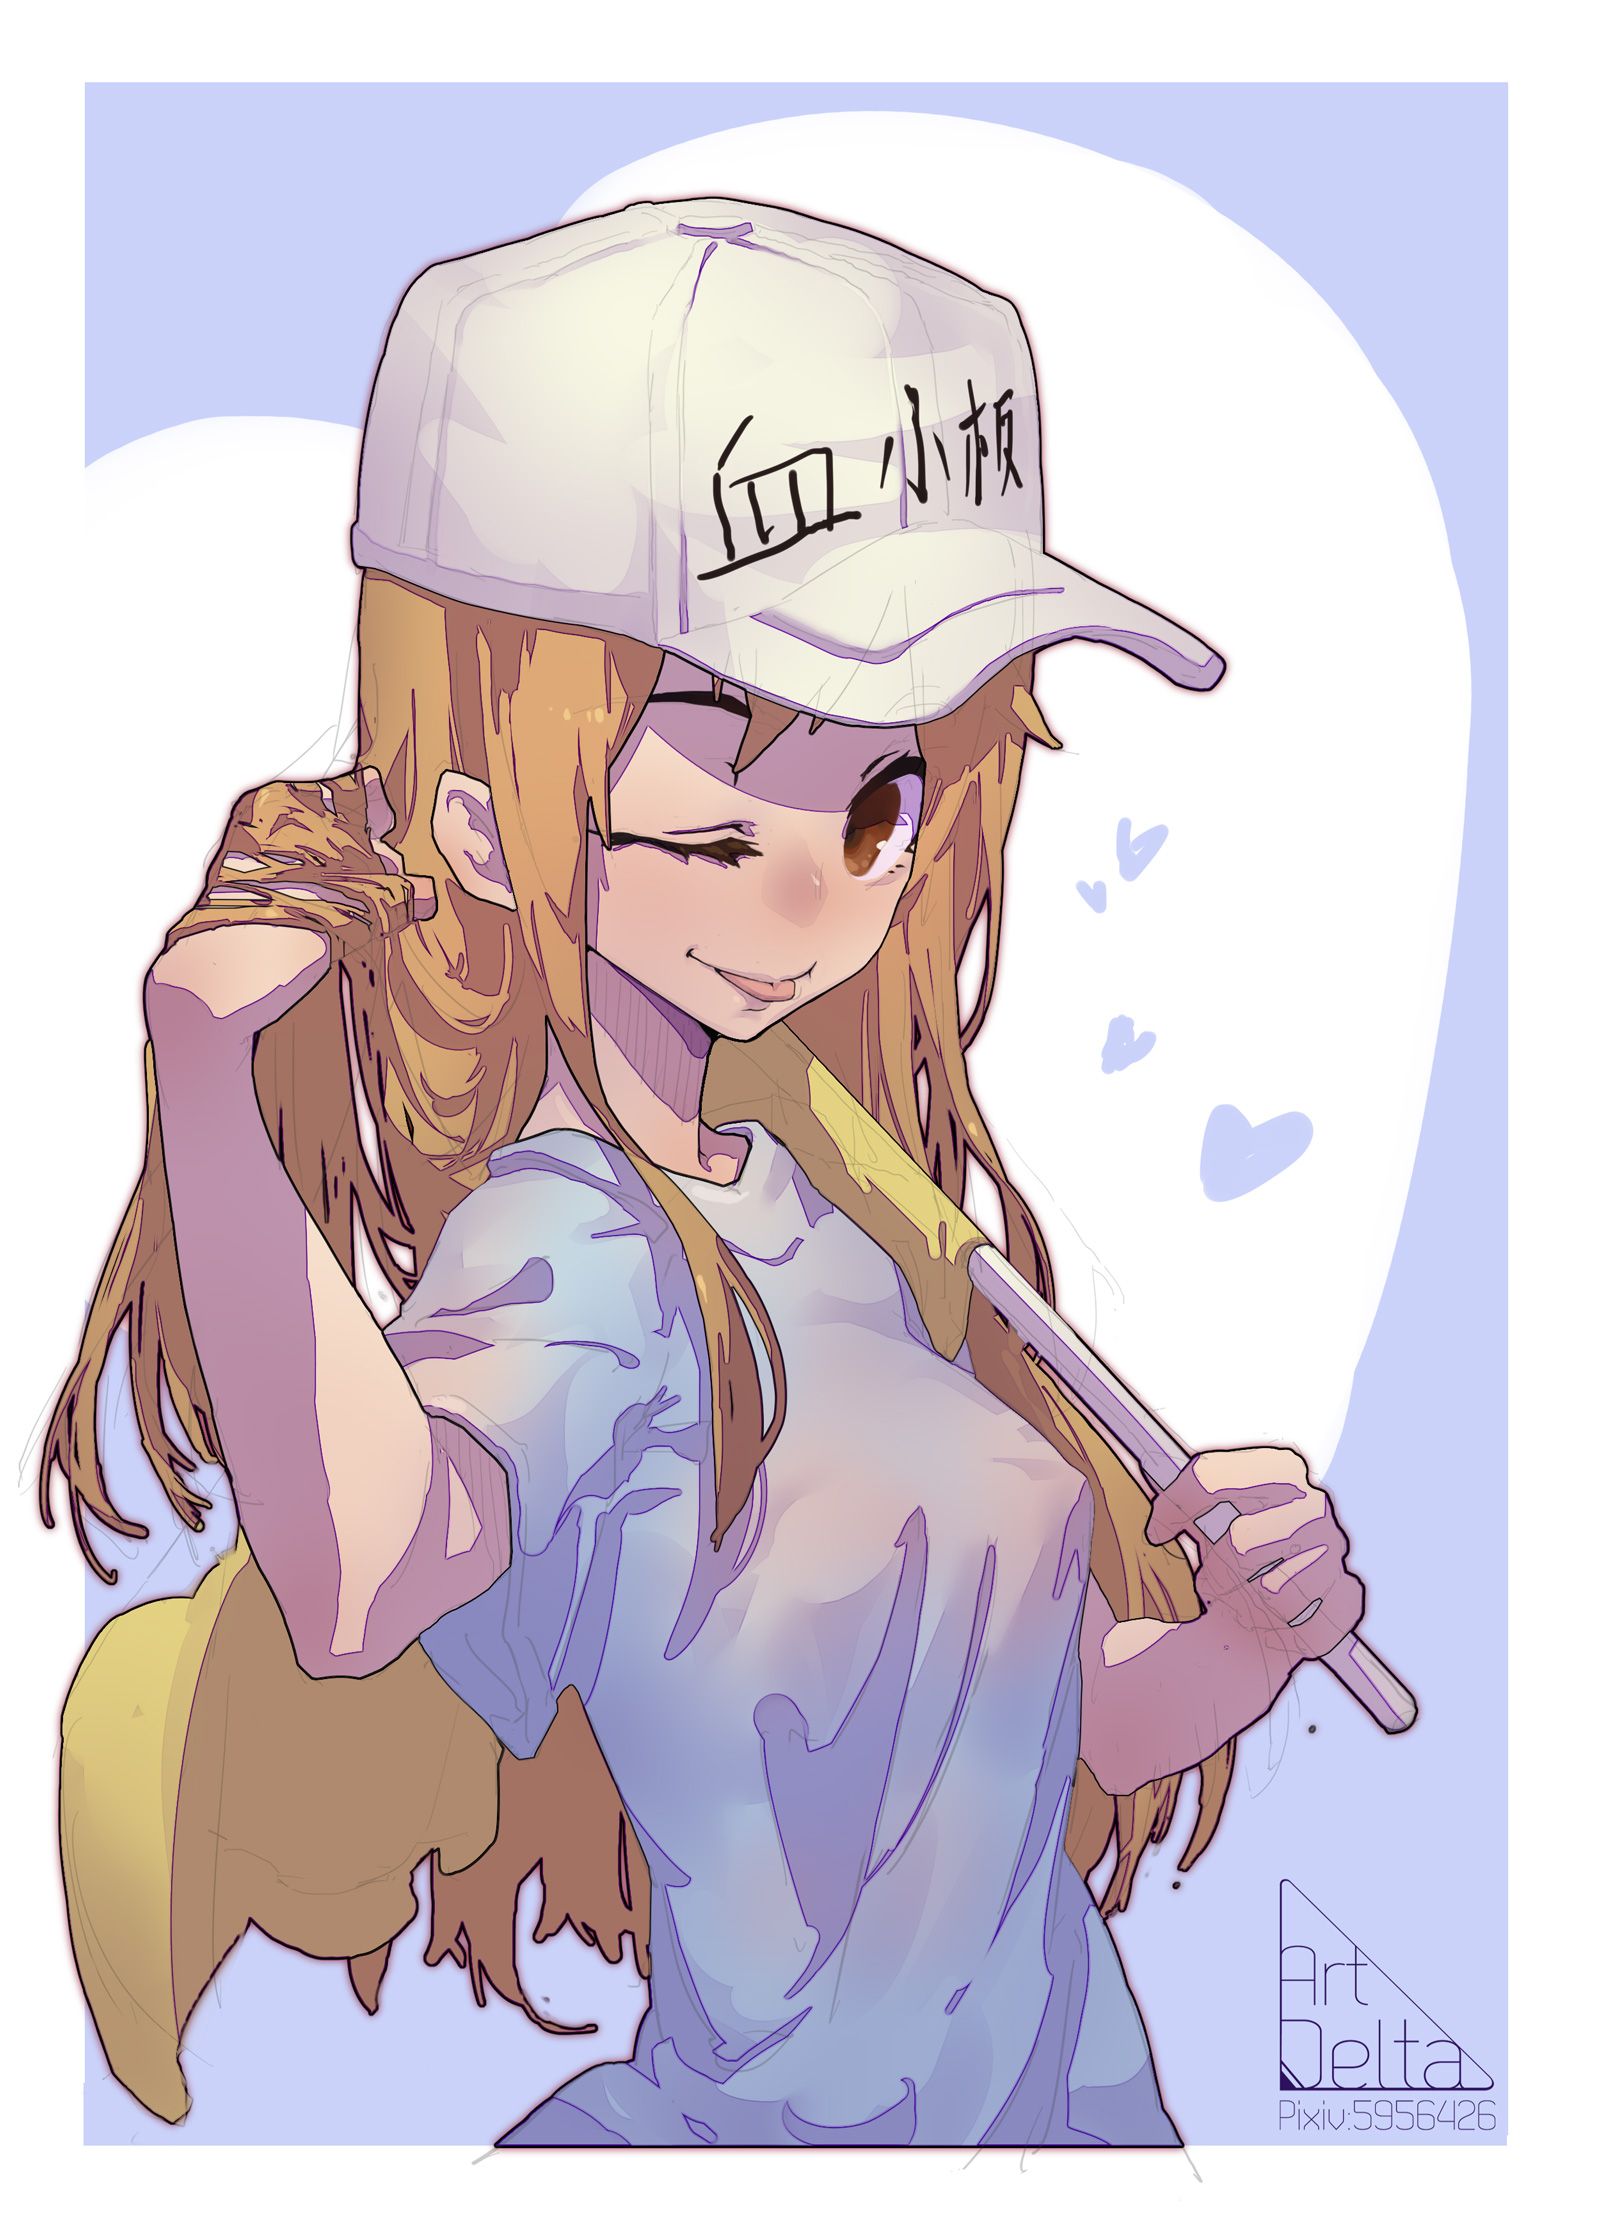 [Working cells] secondary images of platelets 1 60 sheets [ero/non-erotic] 28